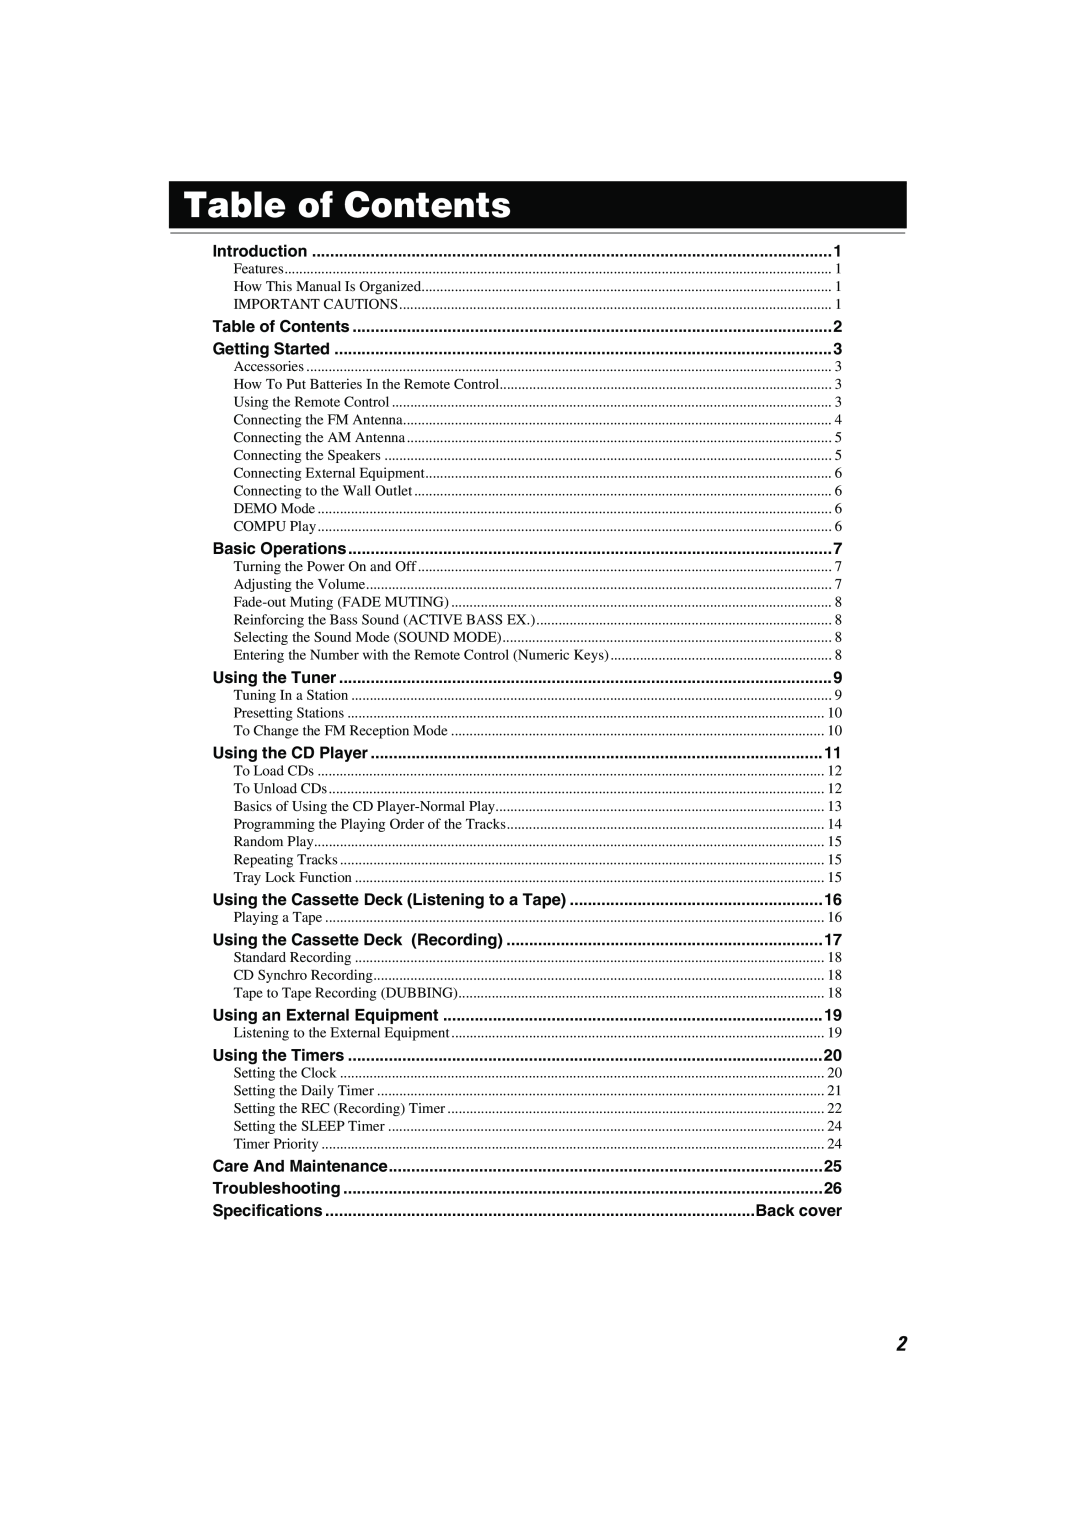 JVC MX-K30 manual Table of Contents 